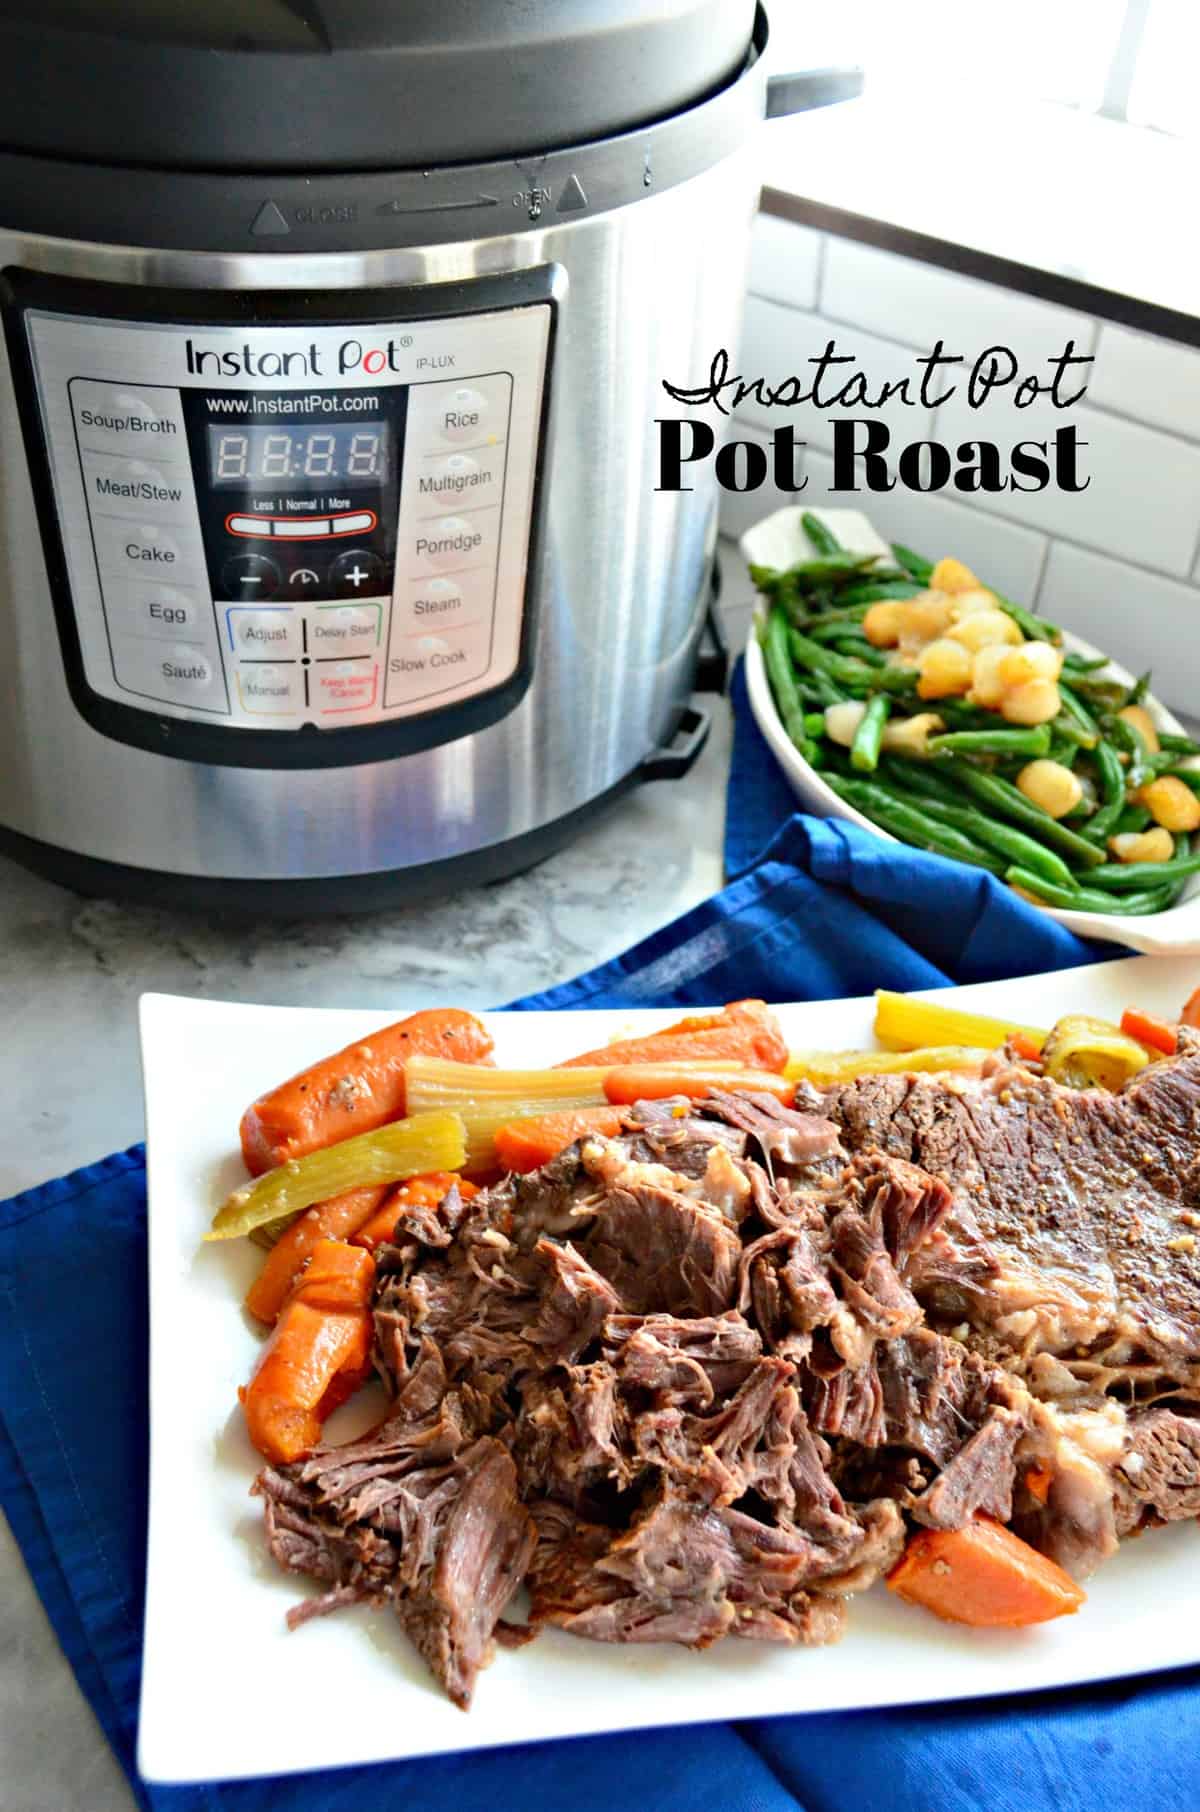 platter of pot roast with carrots and celery in front of instant pot and green bean platter.